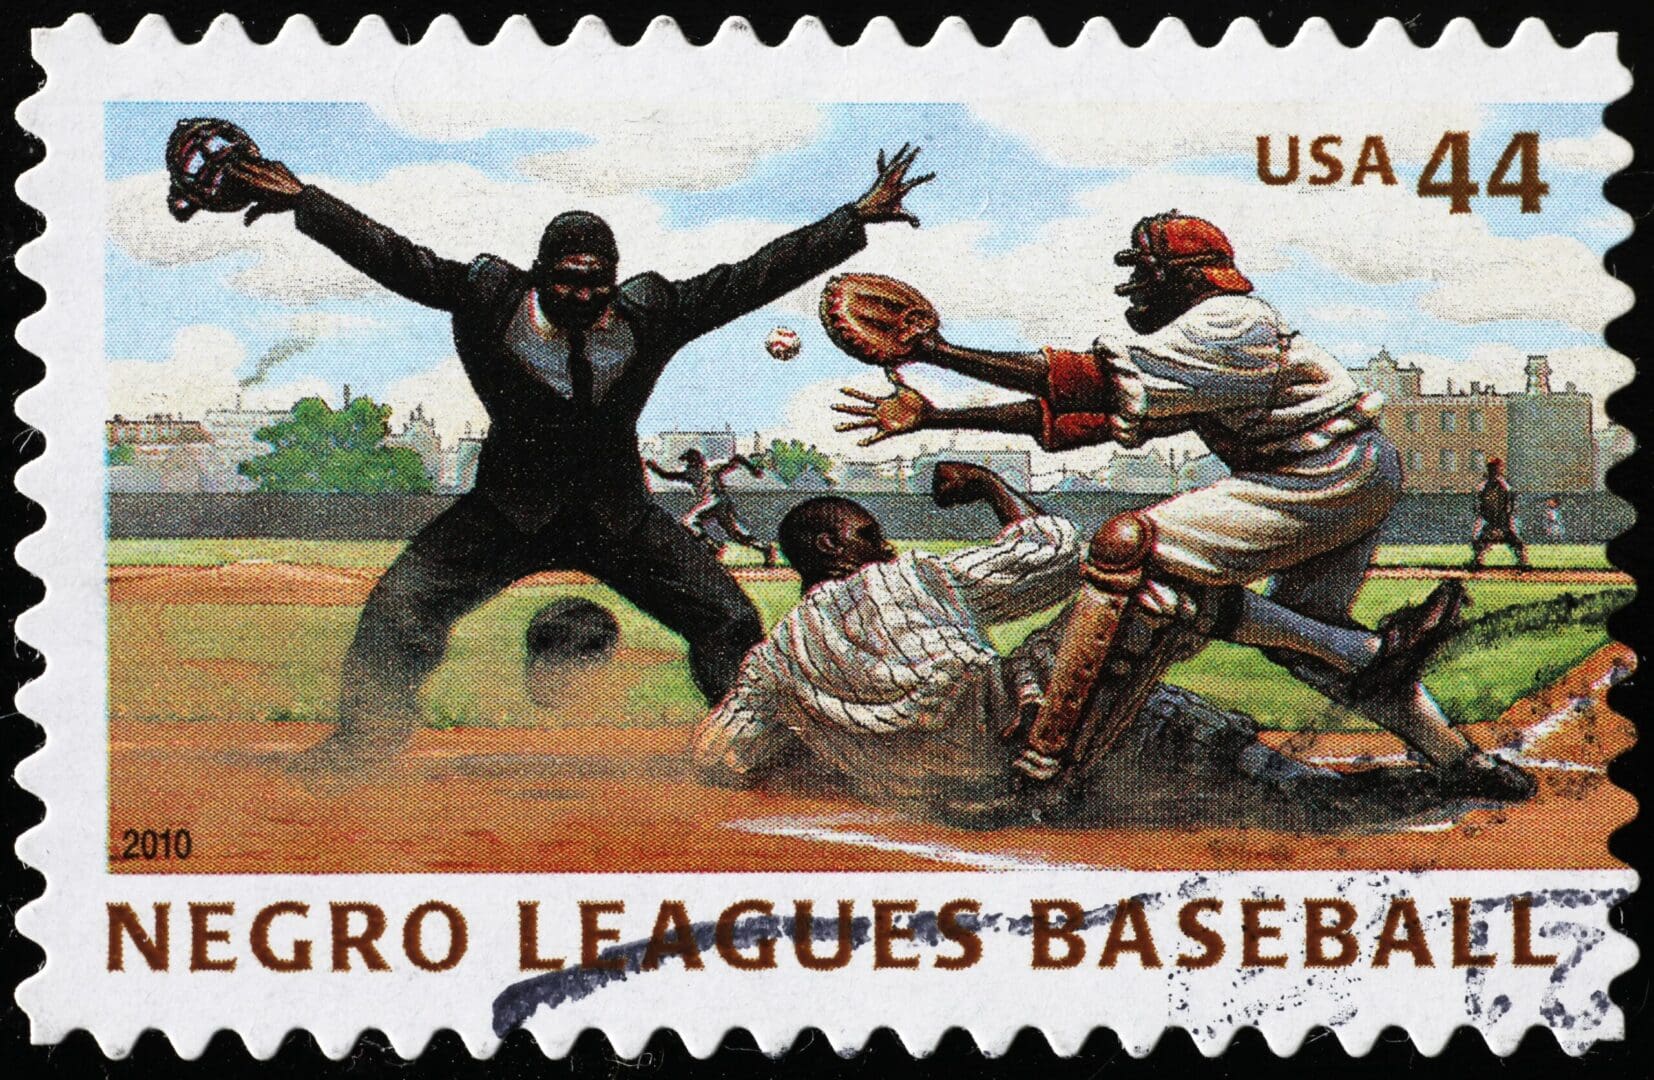 A stamp with a baseball player and catcher.